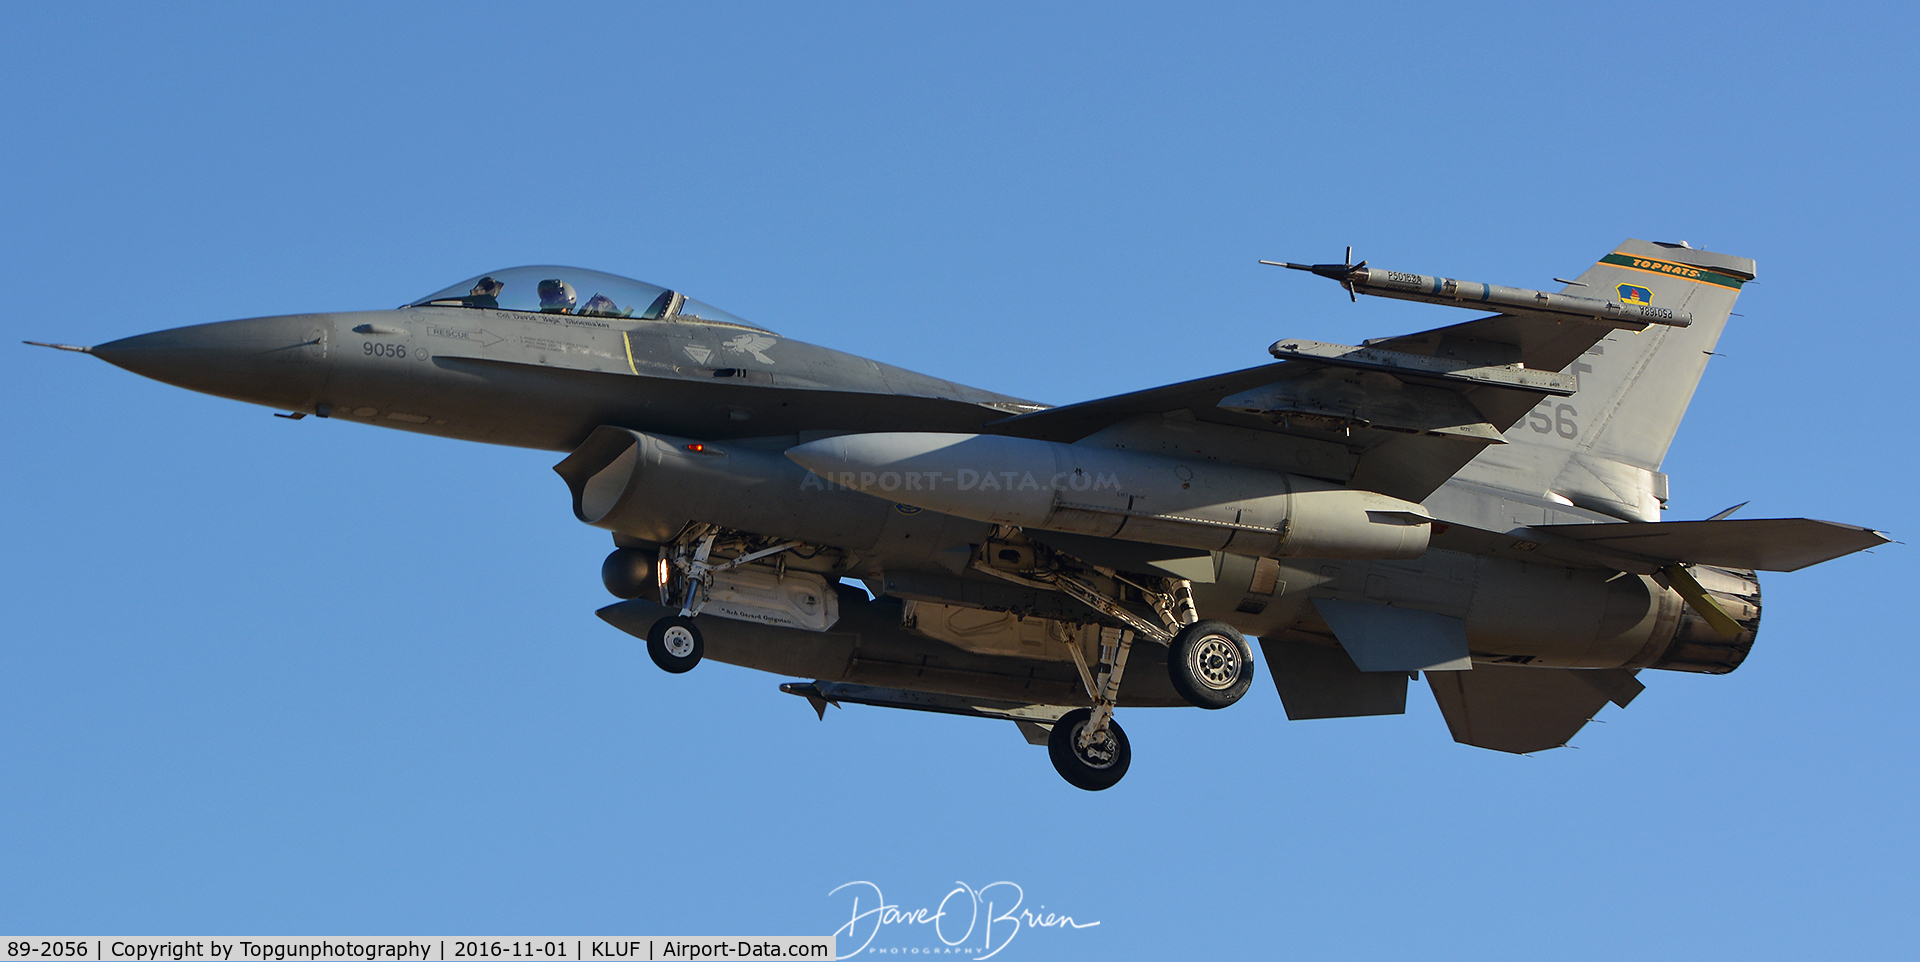 89-2056, 1989 General Dynamics F-16CG Night Falcon C/N 1C-209, coming around again after a missed approach